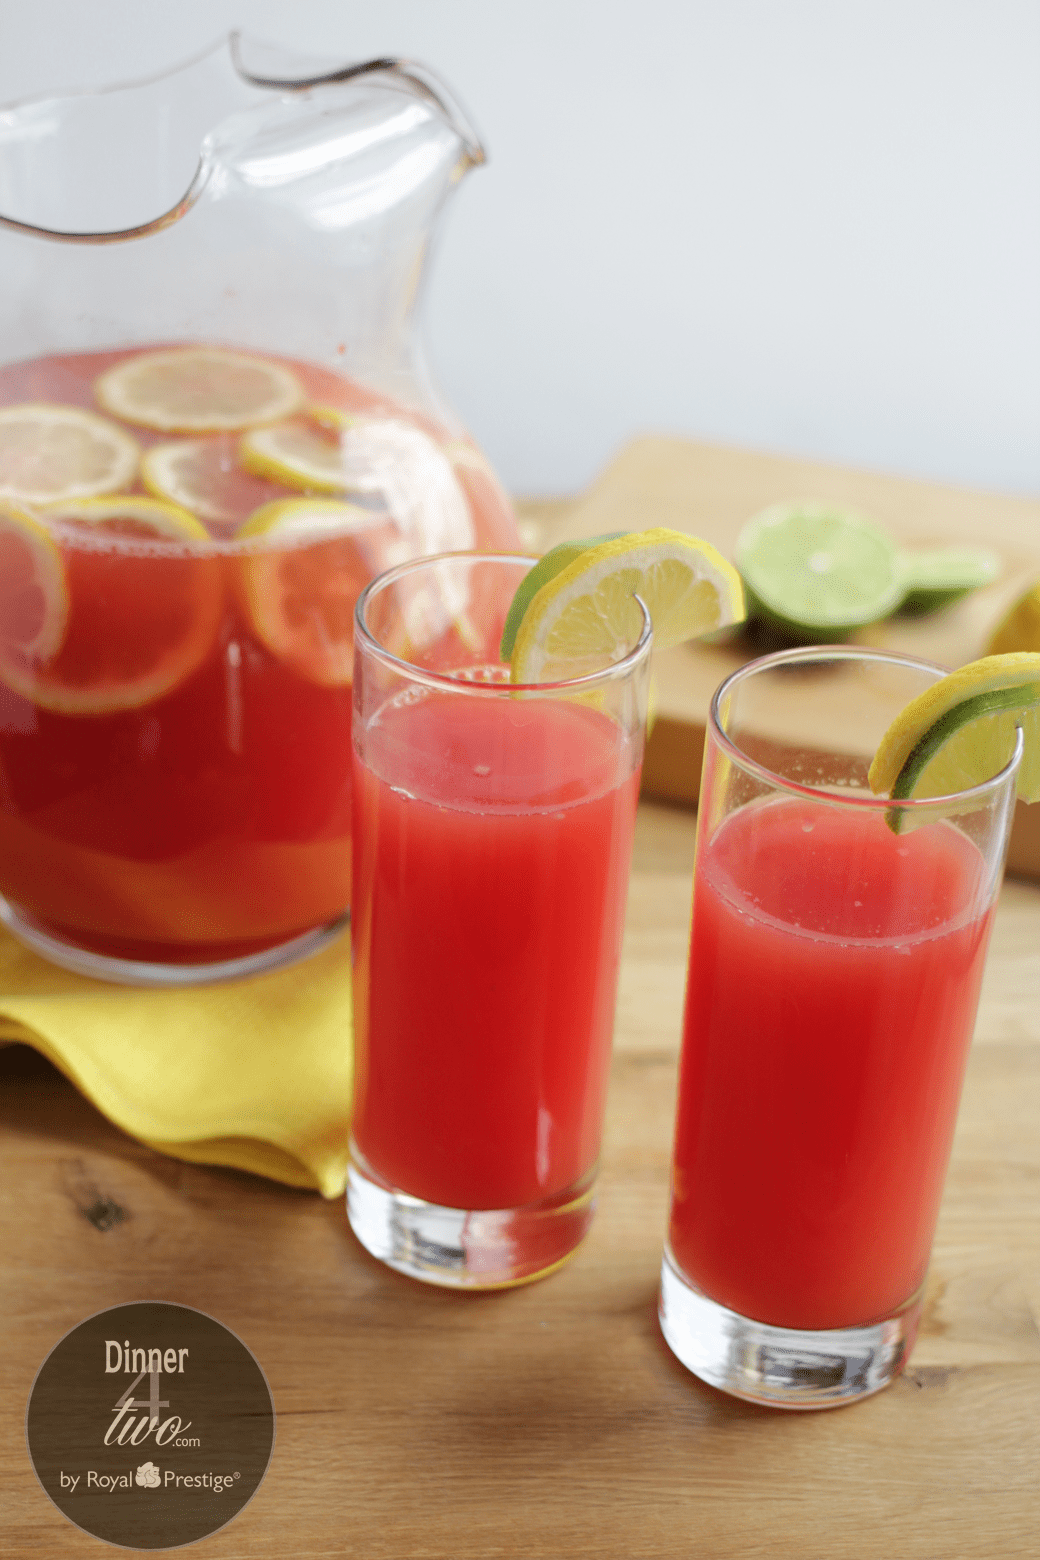 Sweet Watermelon Lemonade with Limes by Dinner4Two